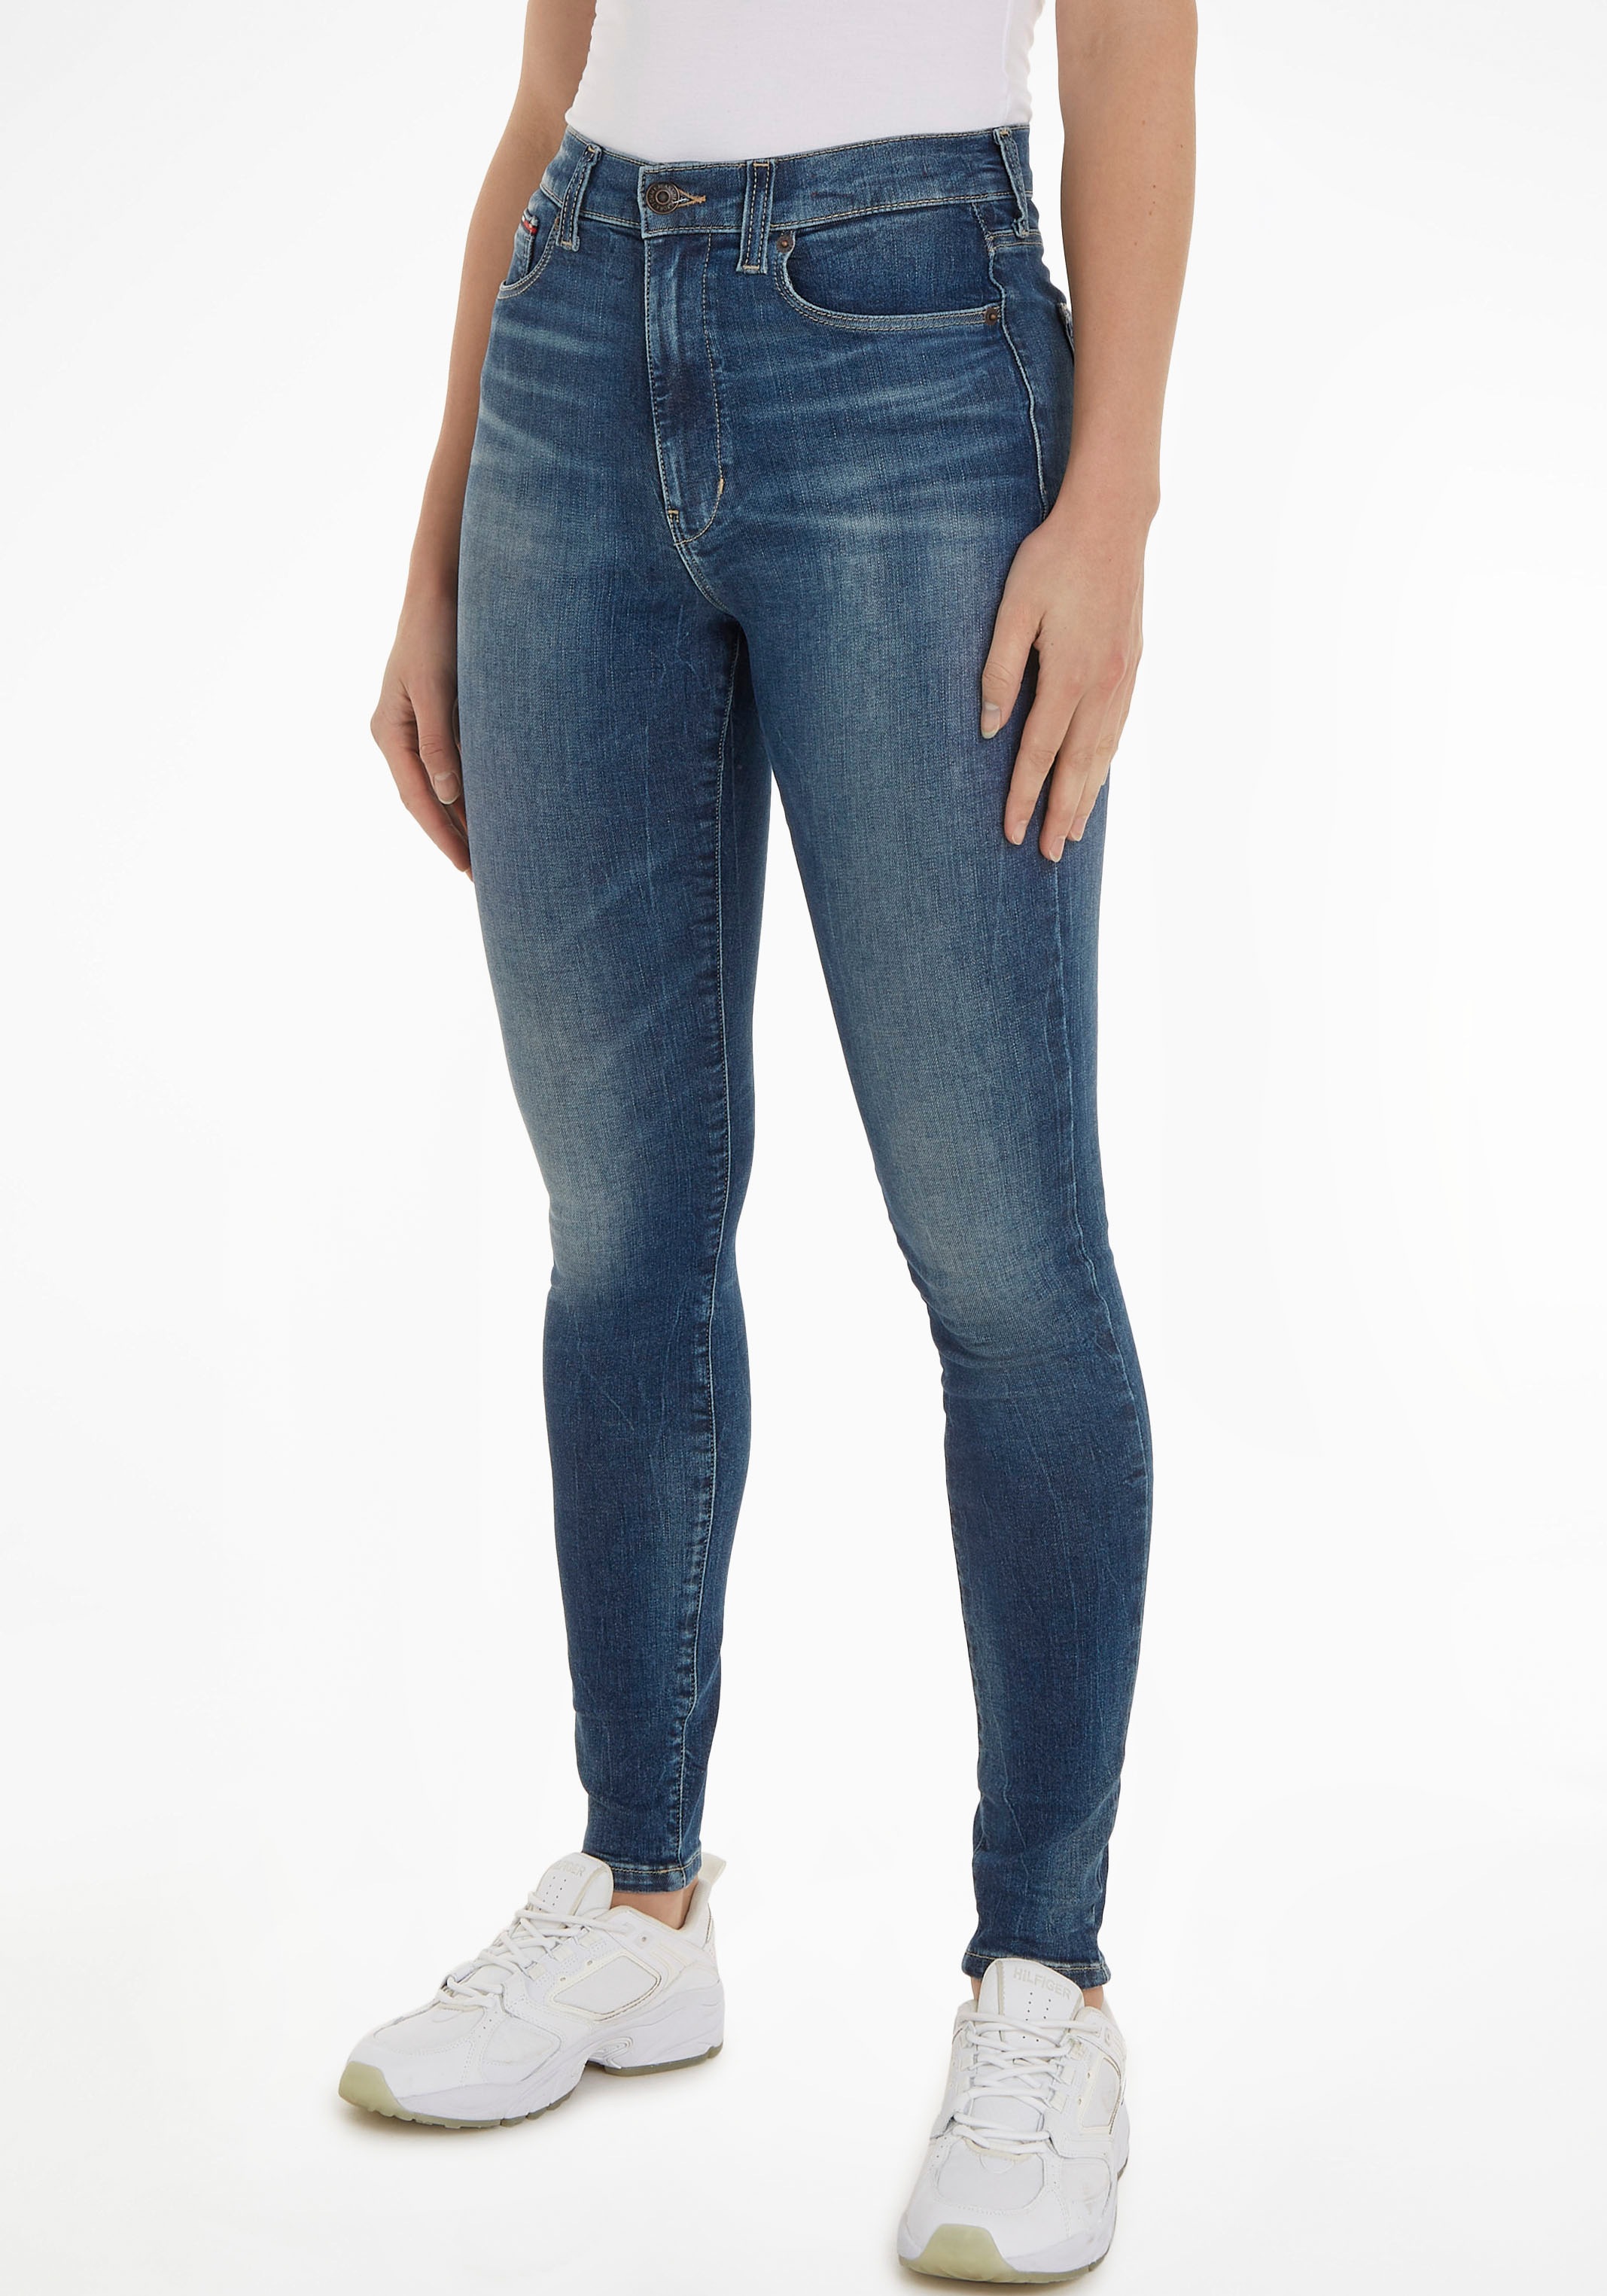 Tommy Jeans Skinny-fit-Jeans »Jeans mit SSKN Labelflags und SYLVIA im Online Logobadge HR CG4«, Shop OTTO